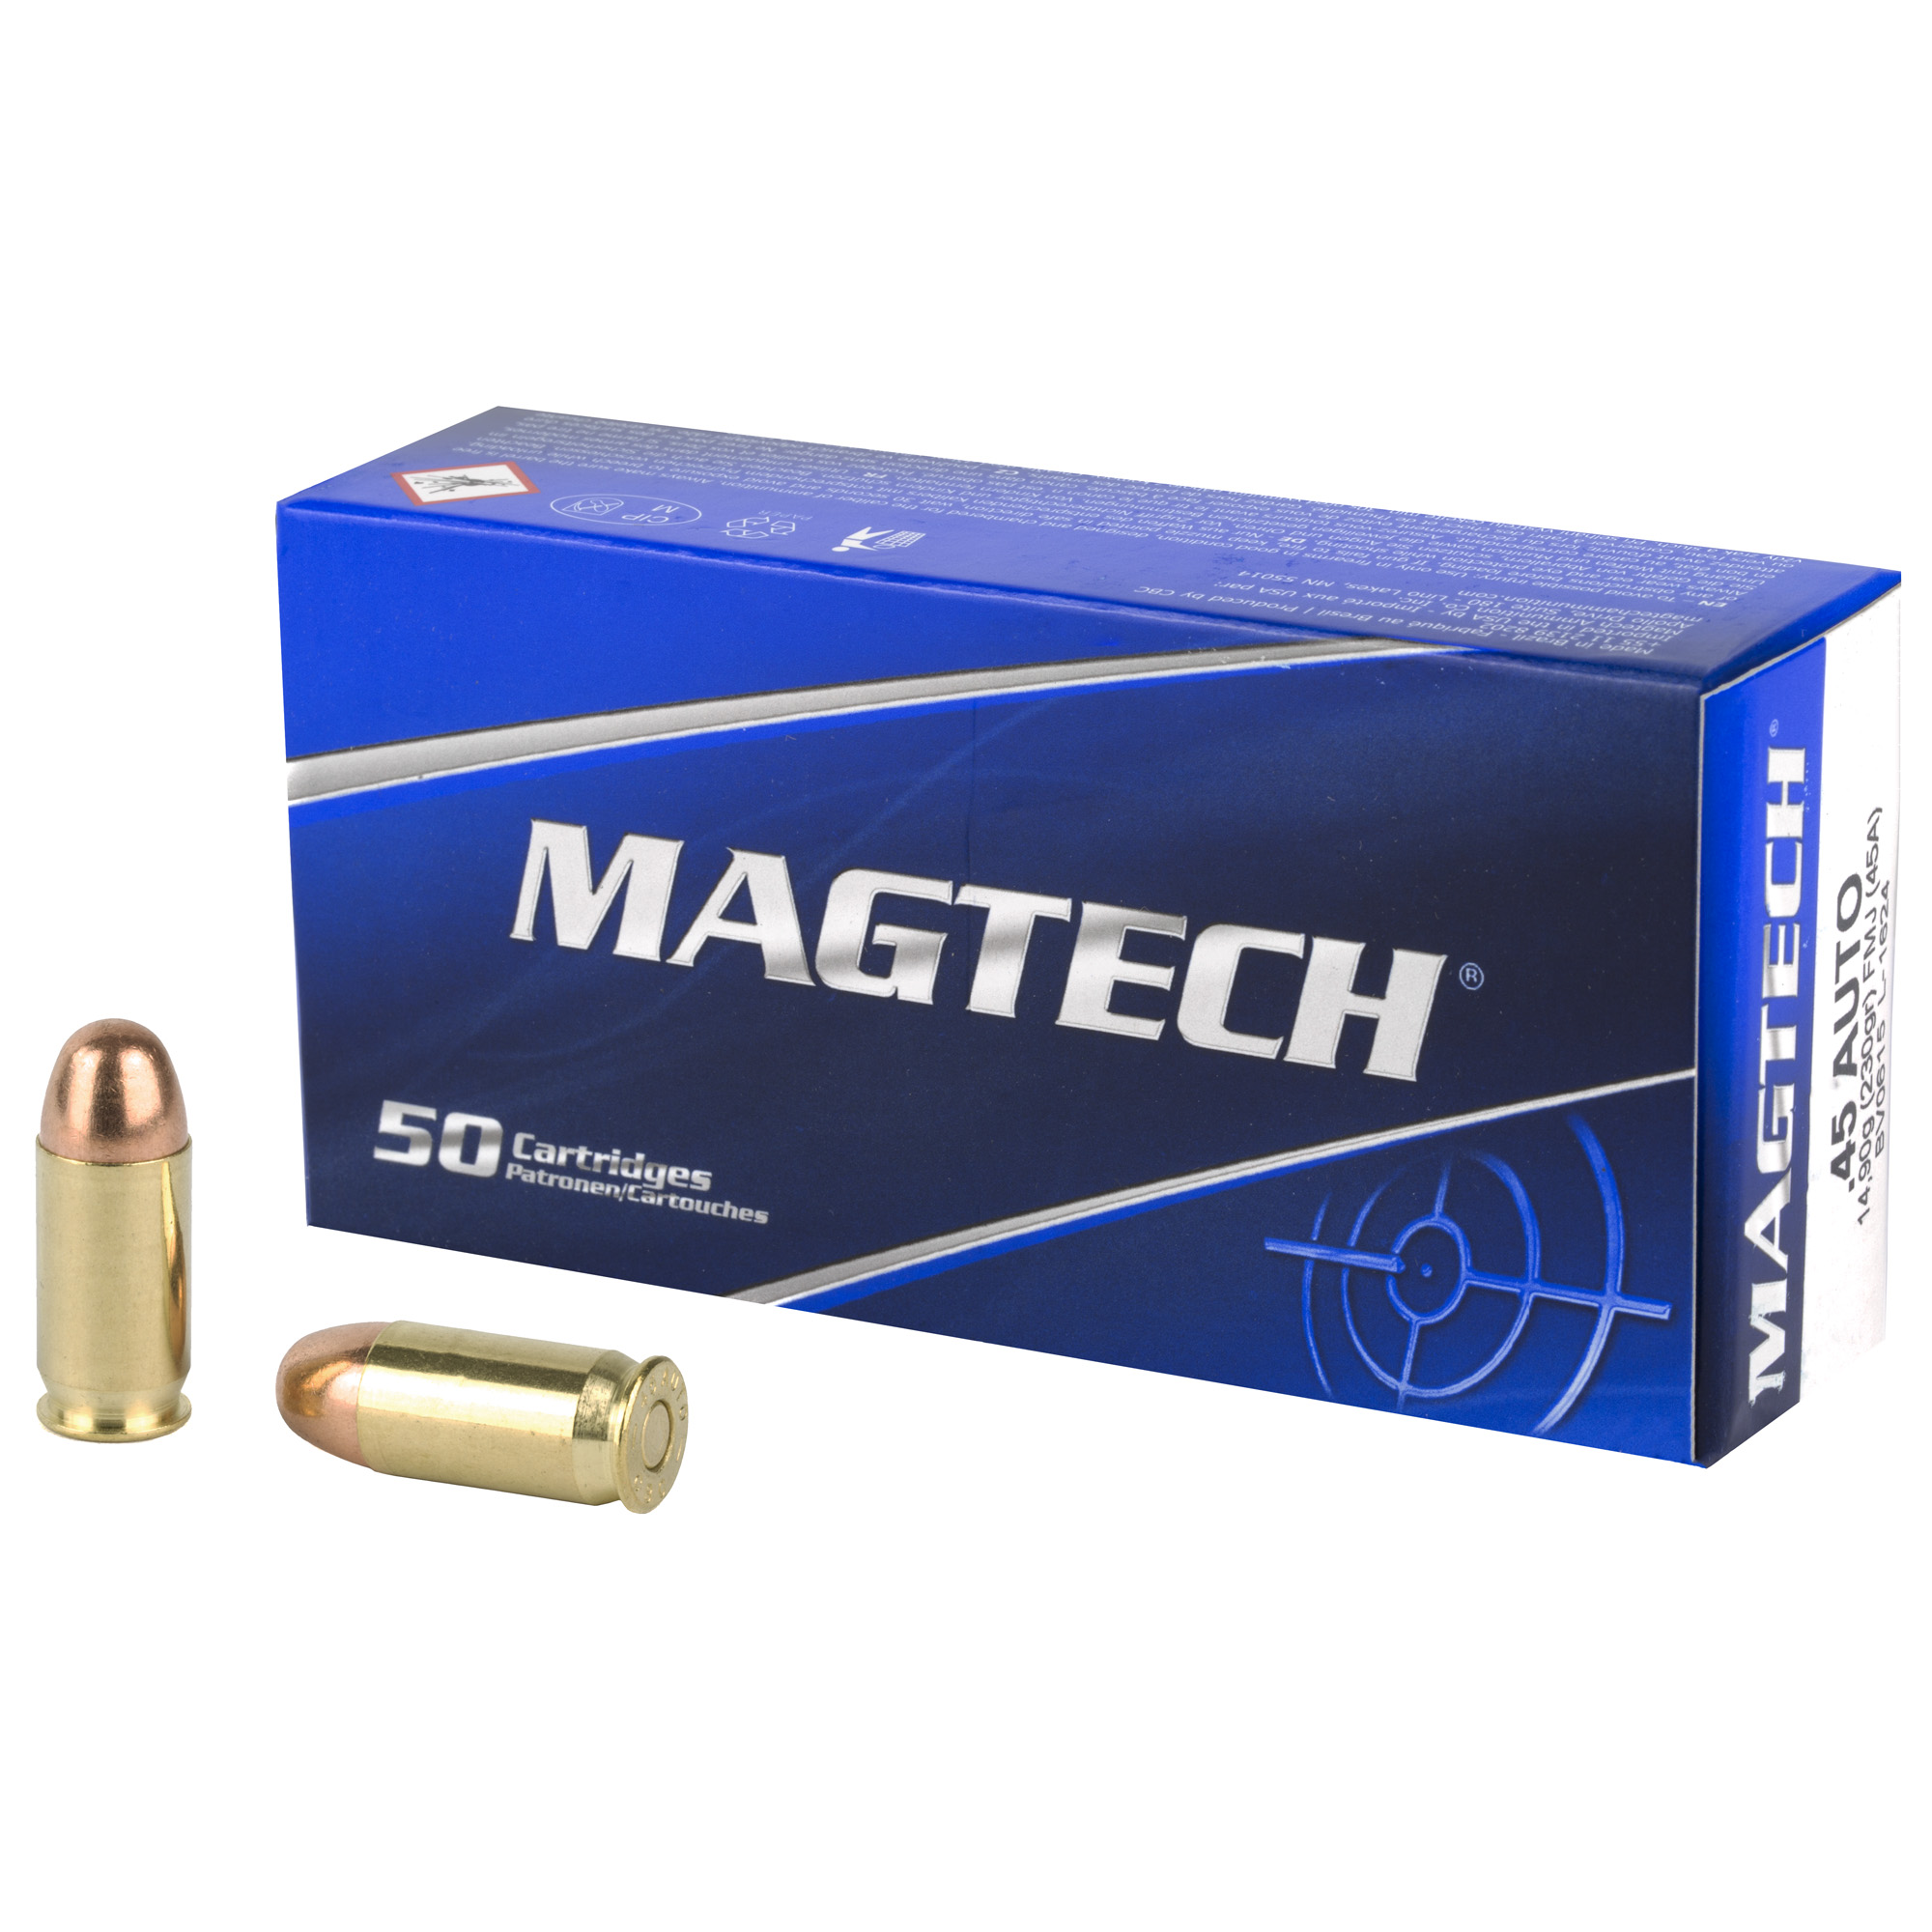 Magtech, Sport Shooting, 45ACP, 230 Grain FMJ, Full Metal Case, 50 Round Box,  Case Pack      20-Boxes (1000Rds.), 45A,